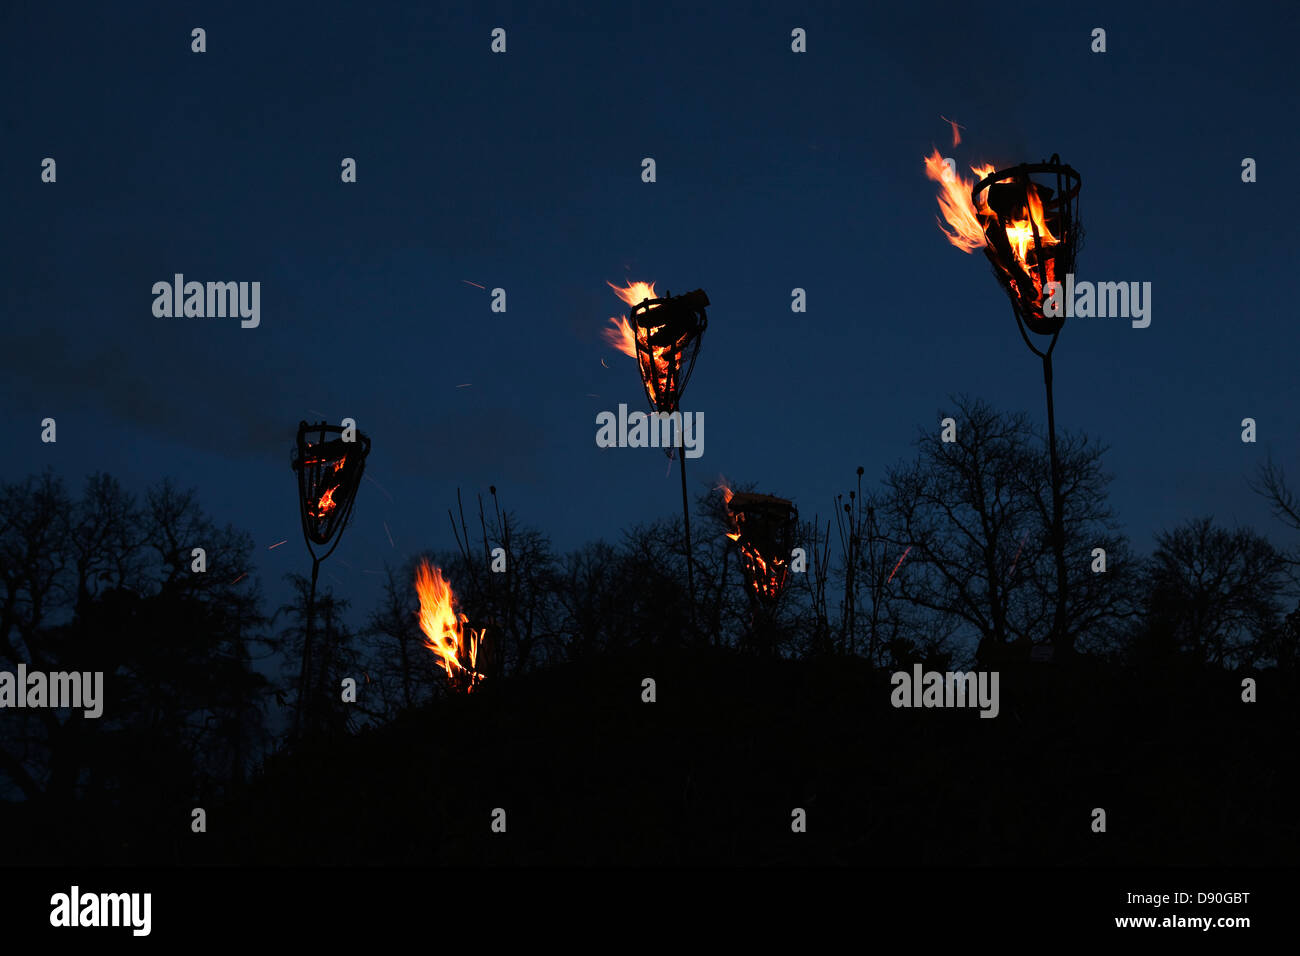 Burning torches at night, Sweden. Stock Photo